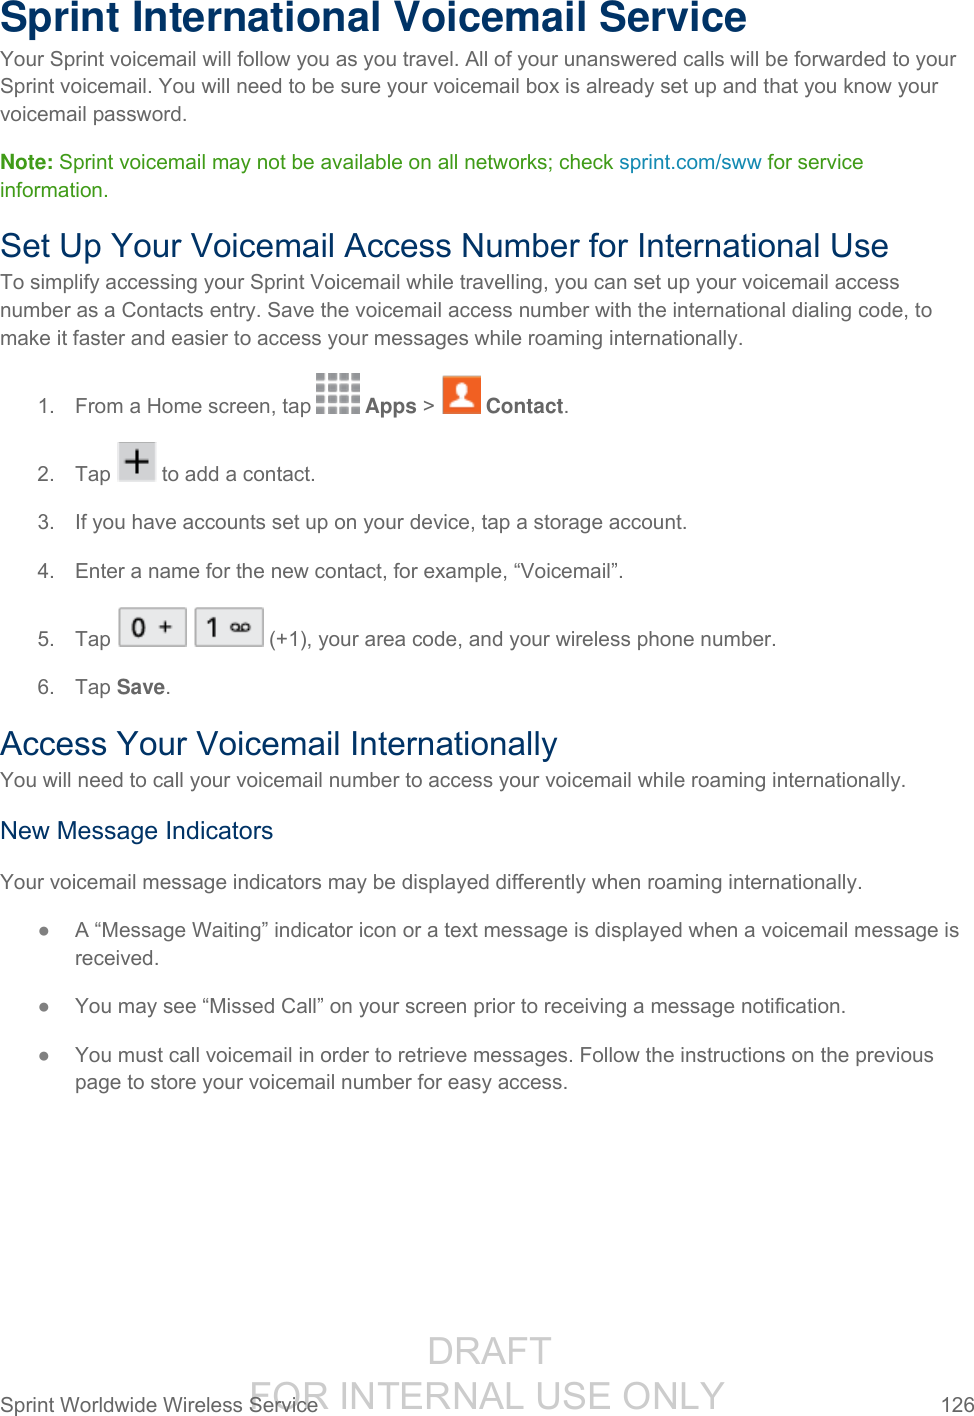                  DRAFT FOR INTERNAL USE ONLY Sprint Worldwide Wireless Service  126   Sprint International Voicemail Service Your Sprint voicemail will follow you as you travel. All of your unanswered calls will be forwarded to your Sprint voicemail. You will need to be sure your voicemail box is already set up and that you know your voicemail password. Note: Sprint voicemail may not be available on all networks; check sprint.com/sww for service information. Set Up Your Voicemail Access Number for International Use To simplify accessing your Sprint Voicemail while travelling, you can set up your voicemail access number as a Contacts entry. Save the voicemail access number with the international dialing code, to make it faster and easier to access your messages while roaming internationally. 1.  From a Home screen, tap   Apps &gt;   Contact. 2.  Tap   to add a contact. 3.  If you have accounts set up on your device, tap a storage account. 4. Enter a name for the new contact, for example, “Voicemail”. 5.  Tap     (+1), your area code, and your wireless phone number.  6.  Tap Save. Access Your Voicemail Internationally You will need to call your voicemail number to access your voicemail while roaming internationally. New Message Indicators Your voicemail message indicators may be displayed differently when roaming internationally. ● A “Message Waiting” indicator icon or a text message is displayed when a voicemail message is received.  ● You may see “Missed Call” on your screen prior to receiving a message notification. ● You must call voicemail in order to retrieve messages. Follow the instructions on the previous page to store your voicemail number for easy access. 